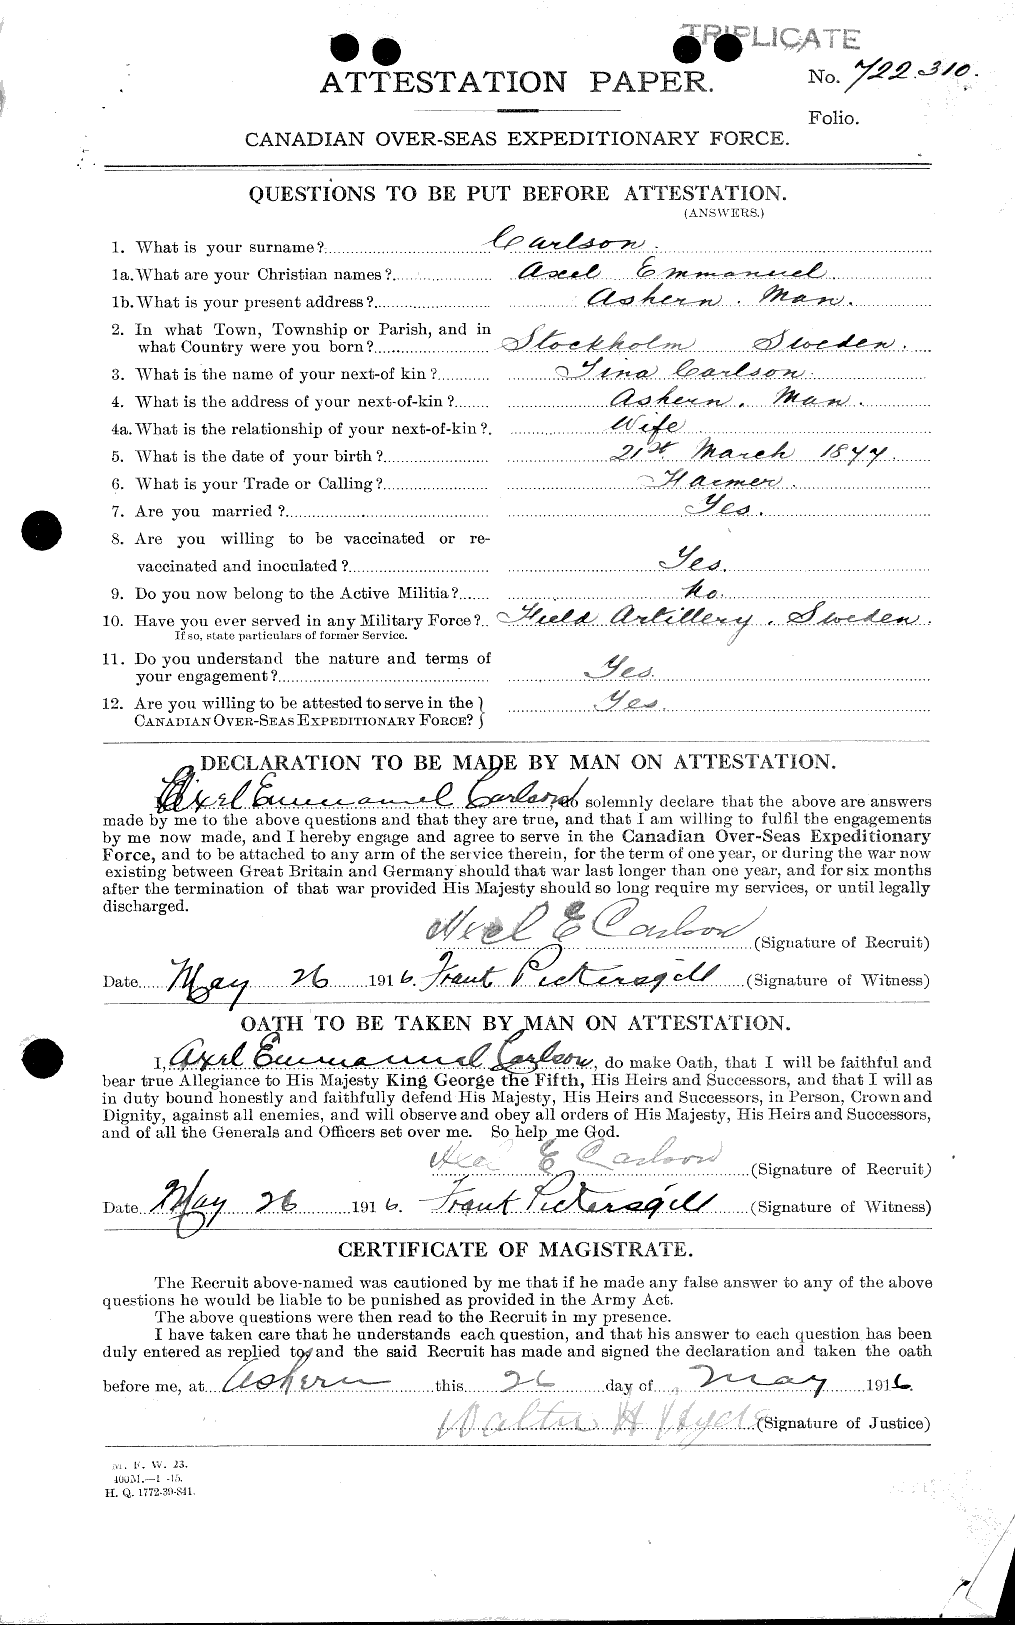 Personnel Records of the First World War - CEF 004489a